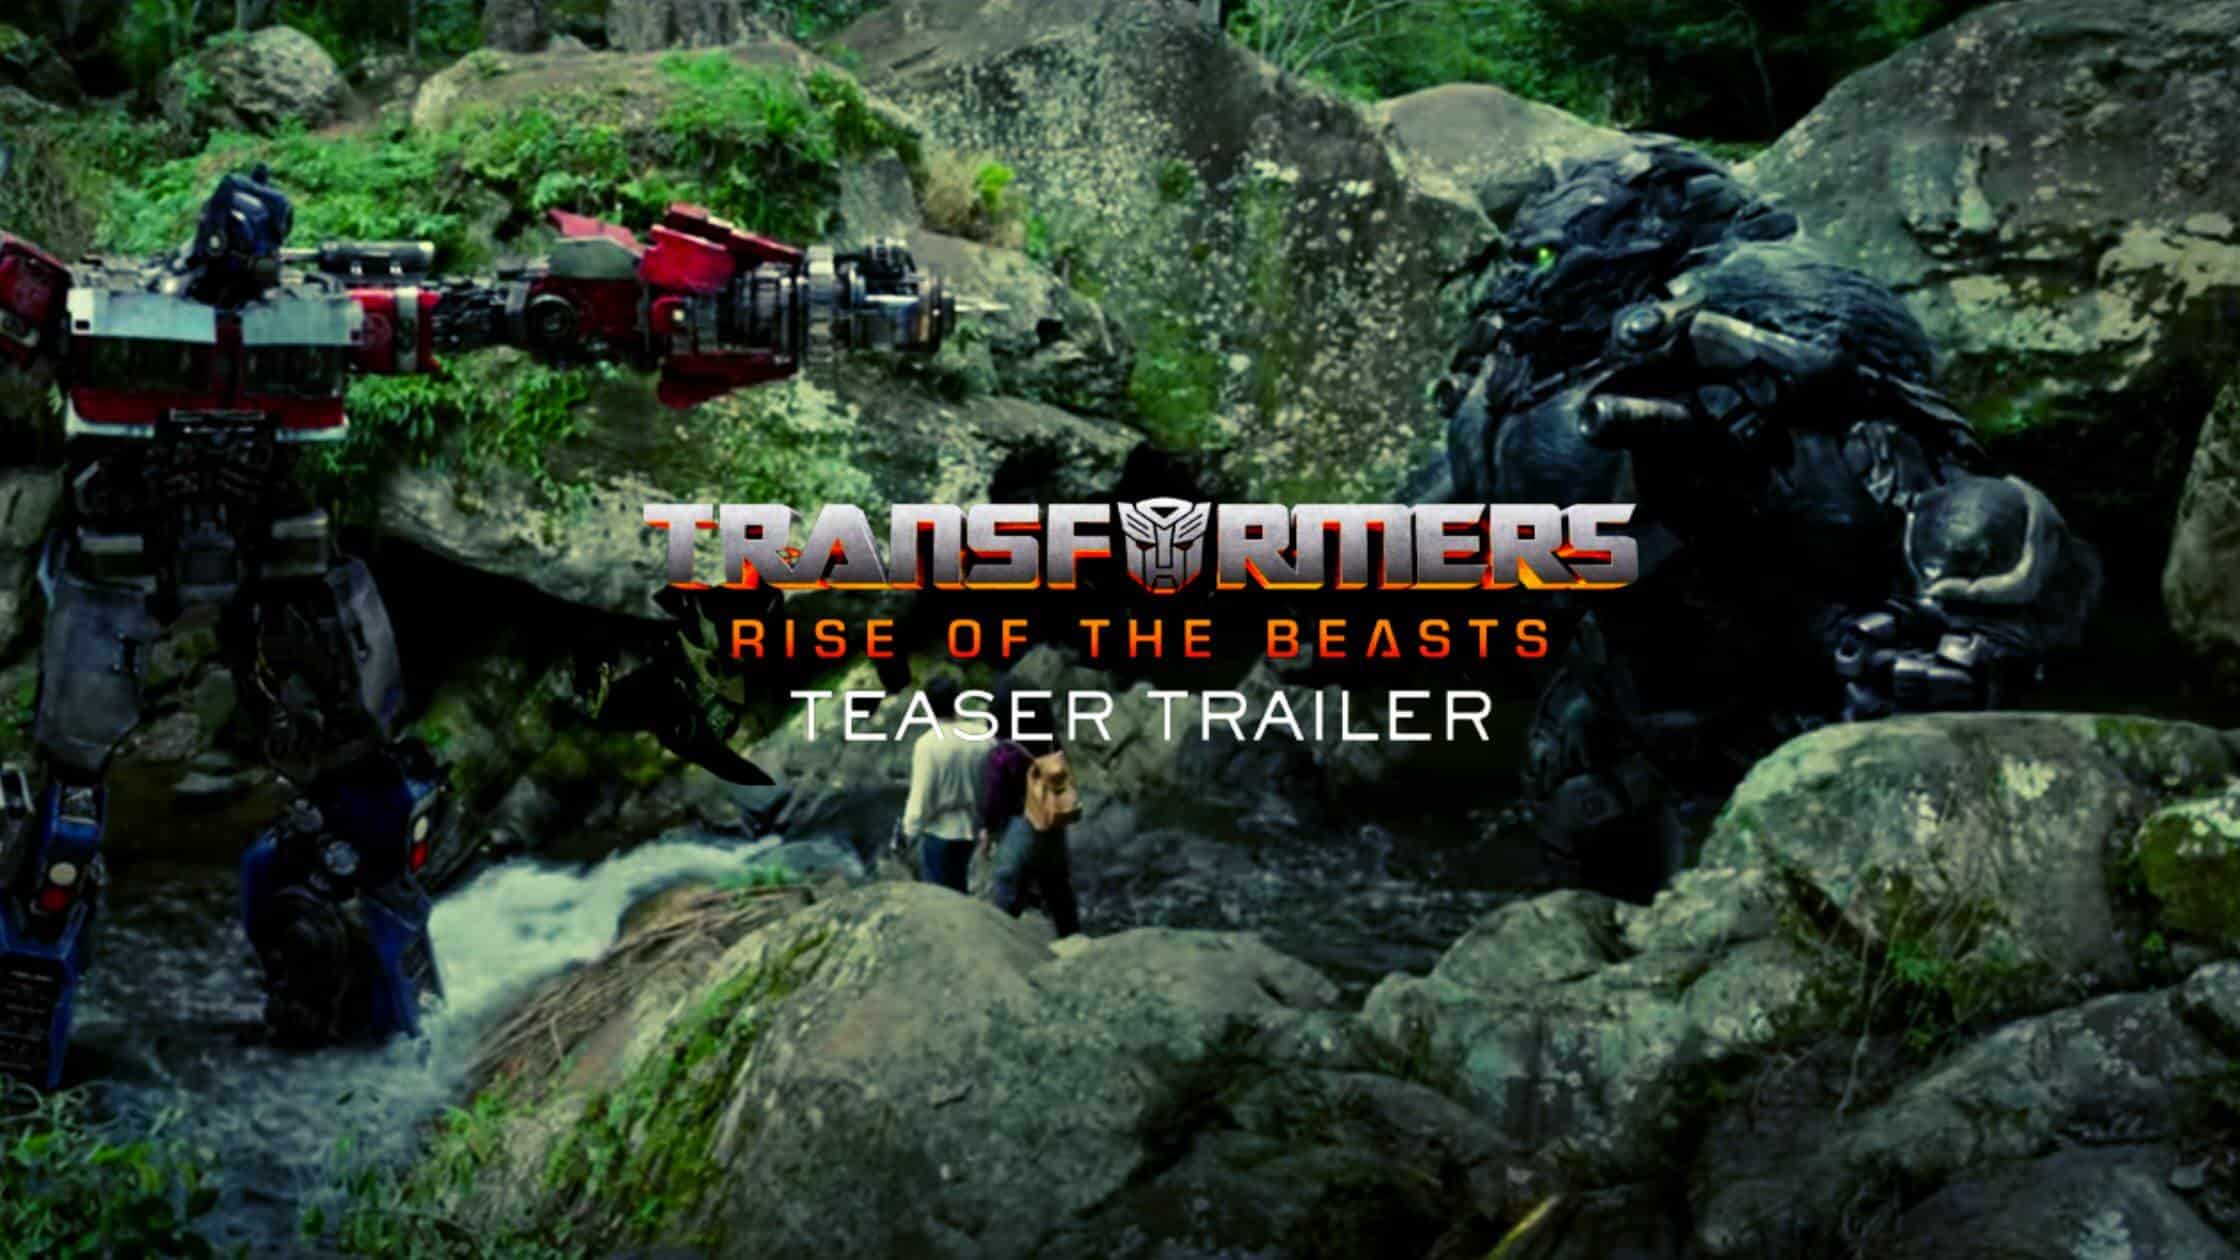 The First Trailer For Transformers Rise Of The Beasts Is Jam-Packed With Intense Action